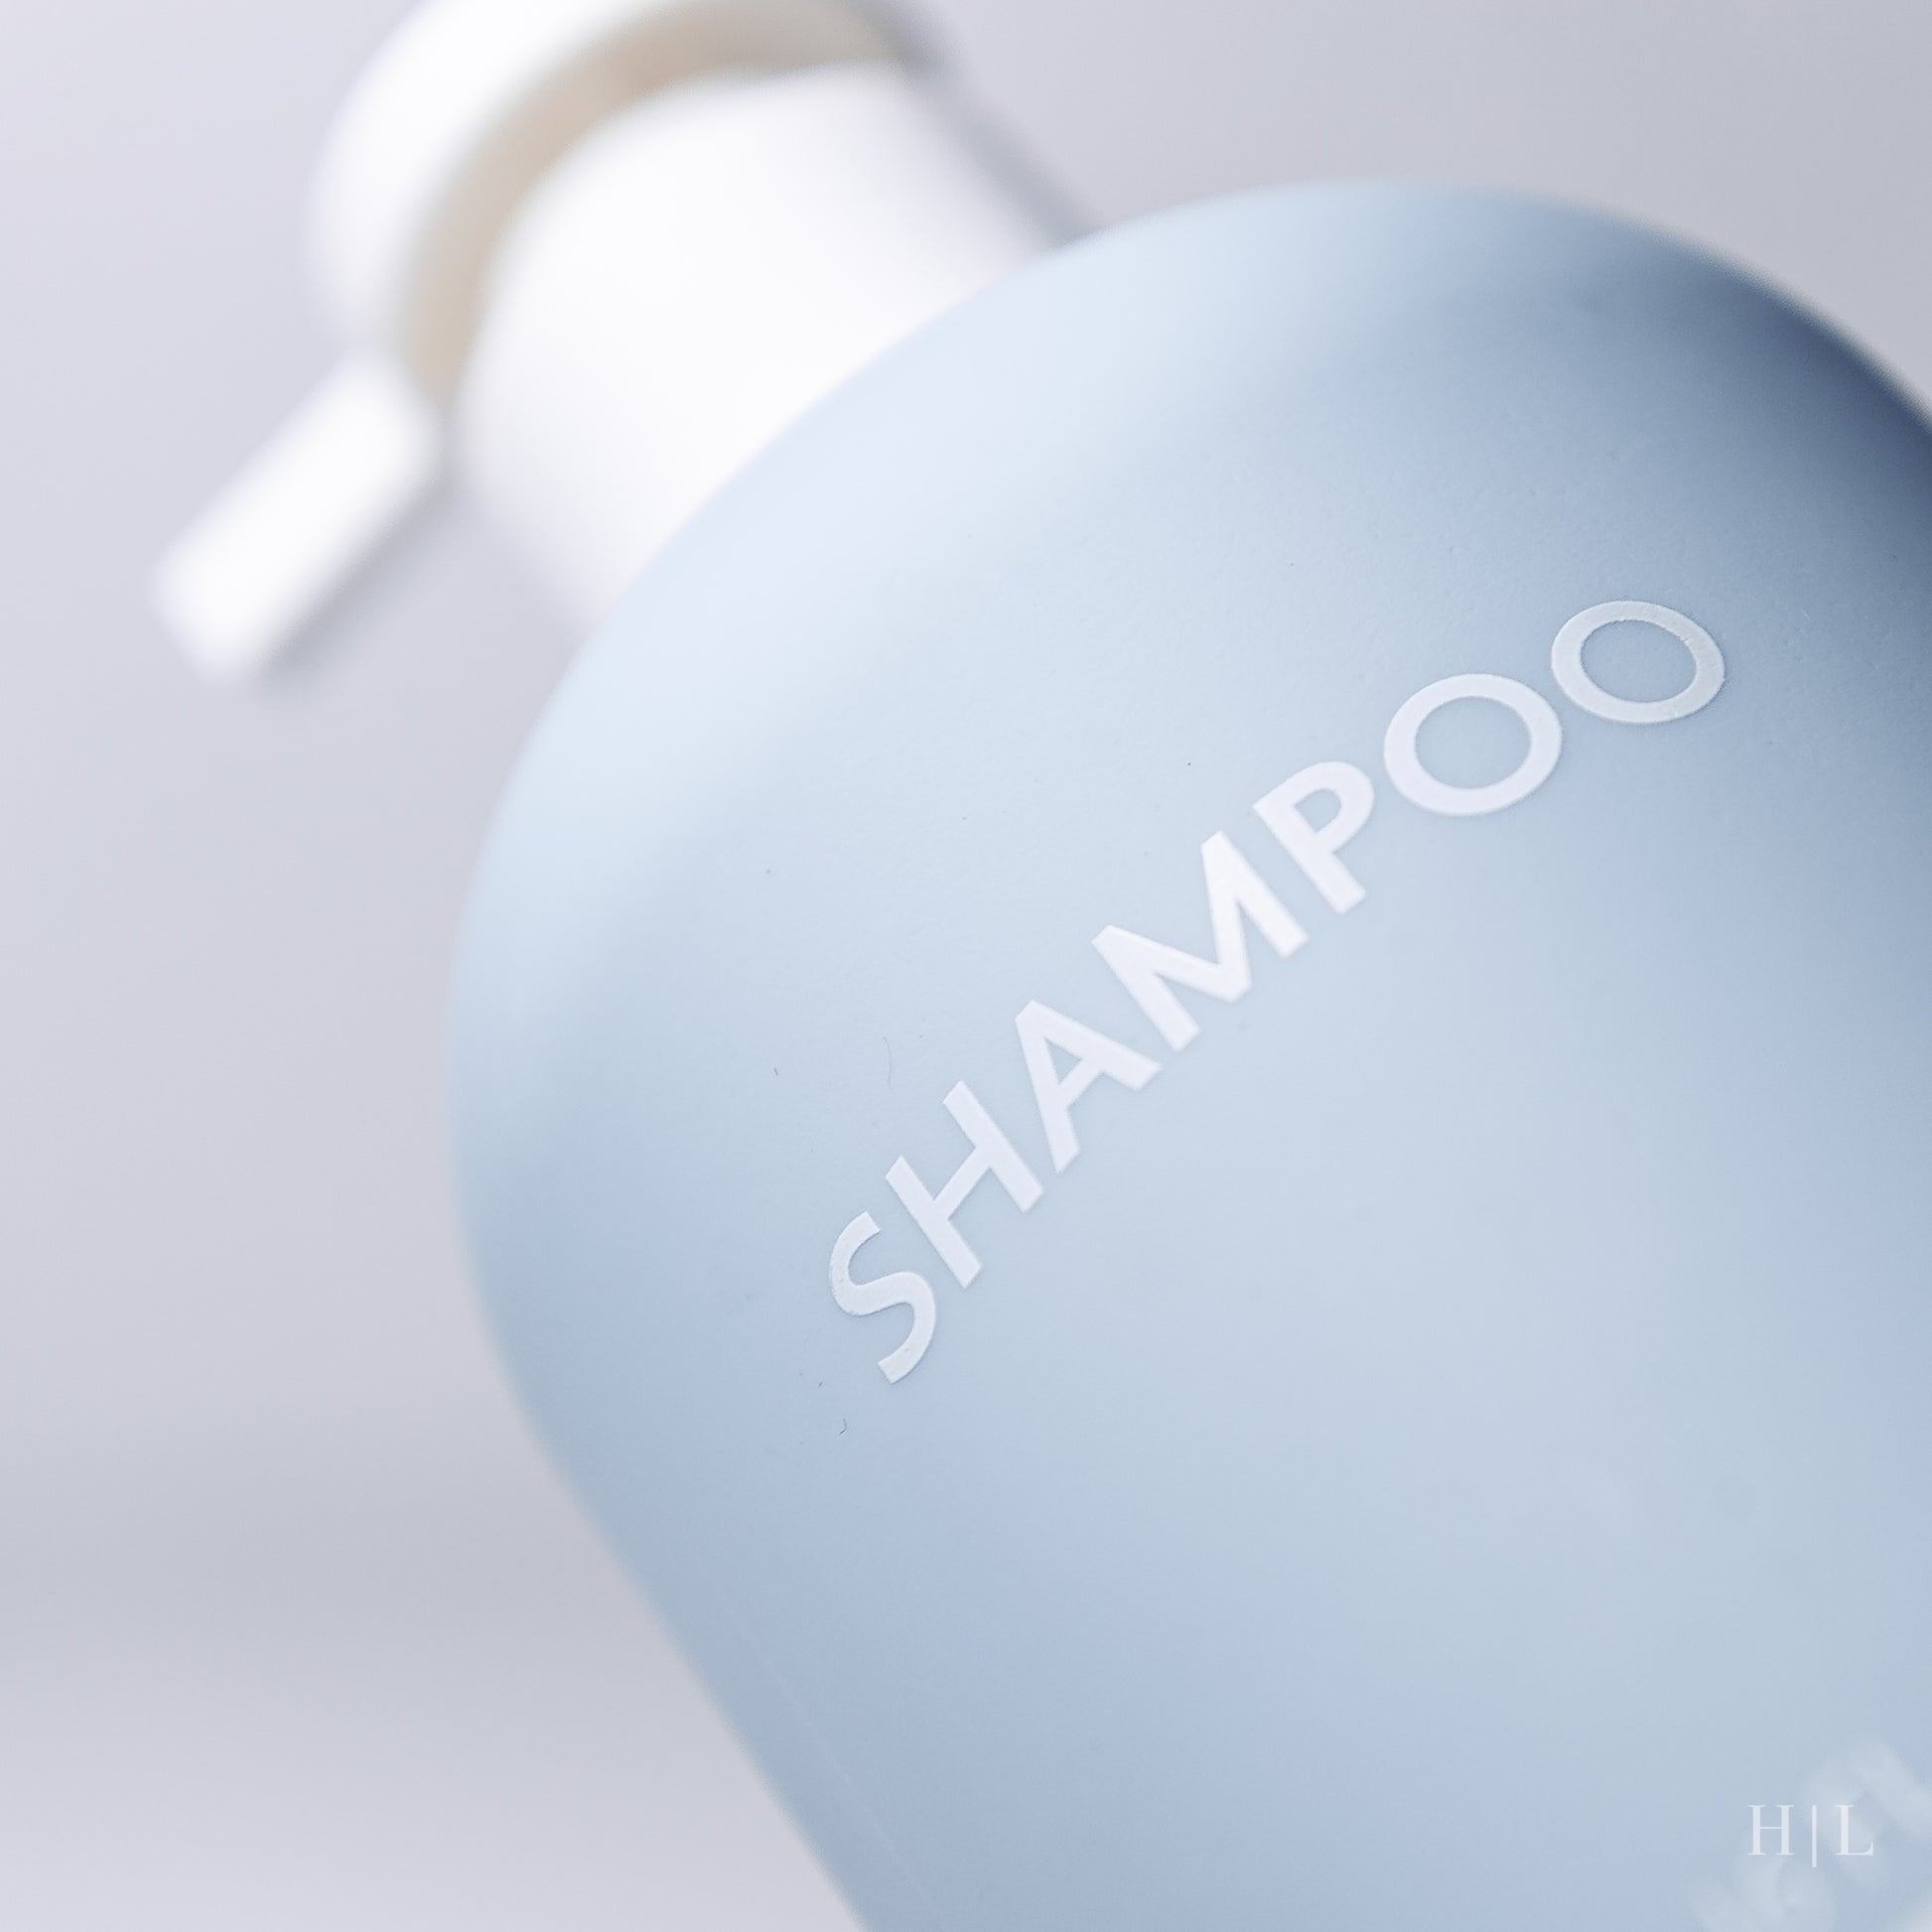 a close up of a bottle of shampoo